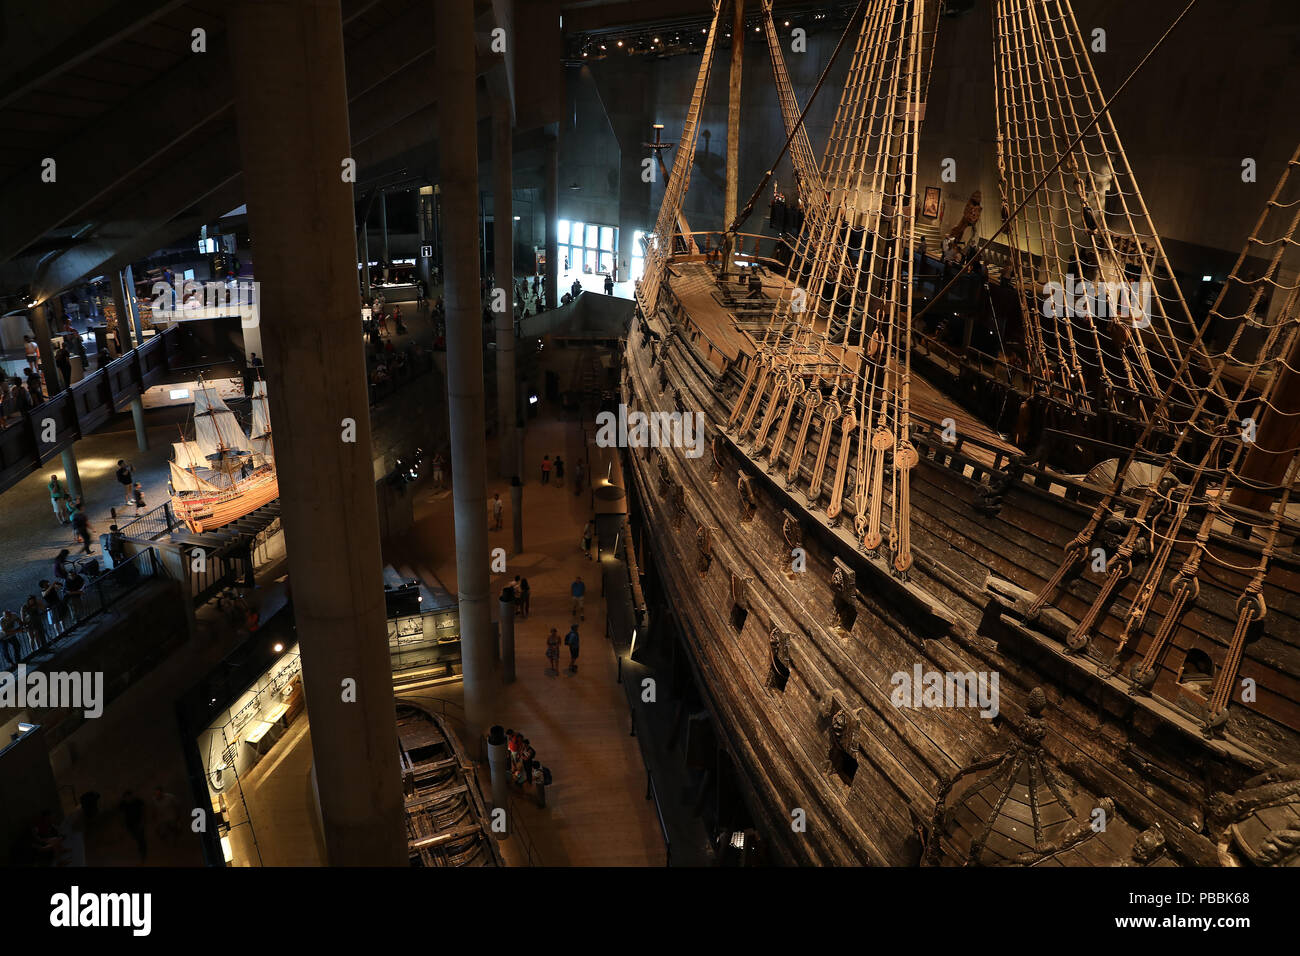 Vasa the Swedish Flagship of King of Sweden Gustavus Adolphus which foundered on her maiden journey on the 10 August 1628 Stock Photo